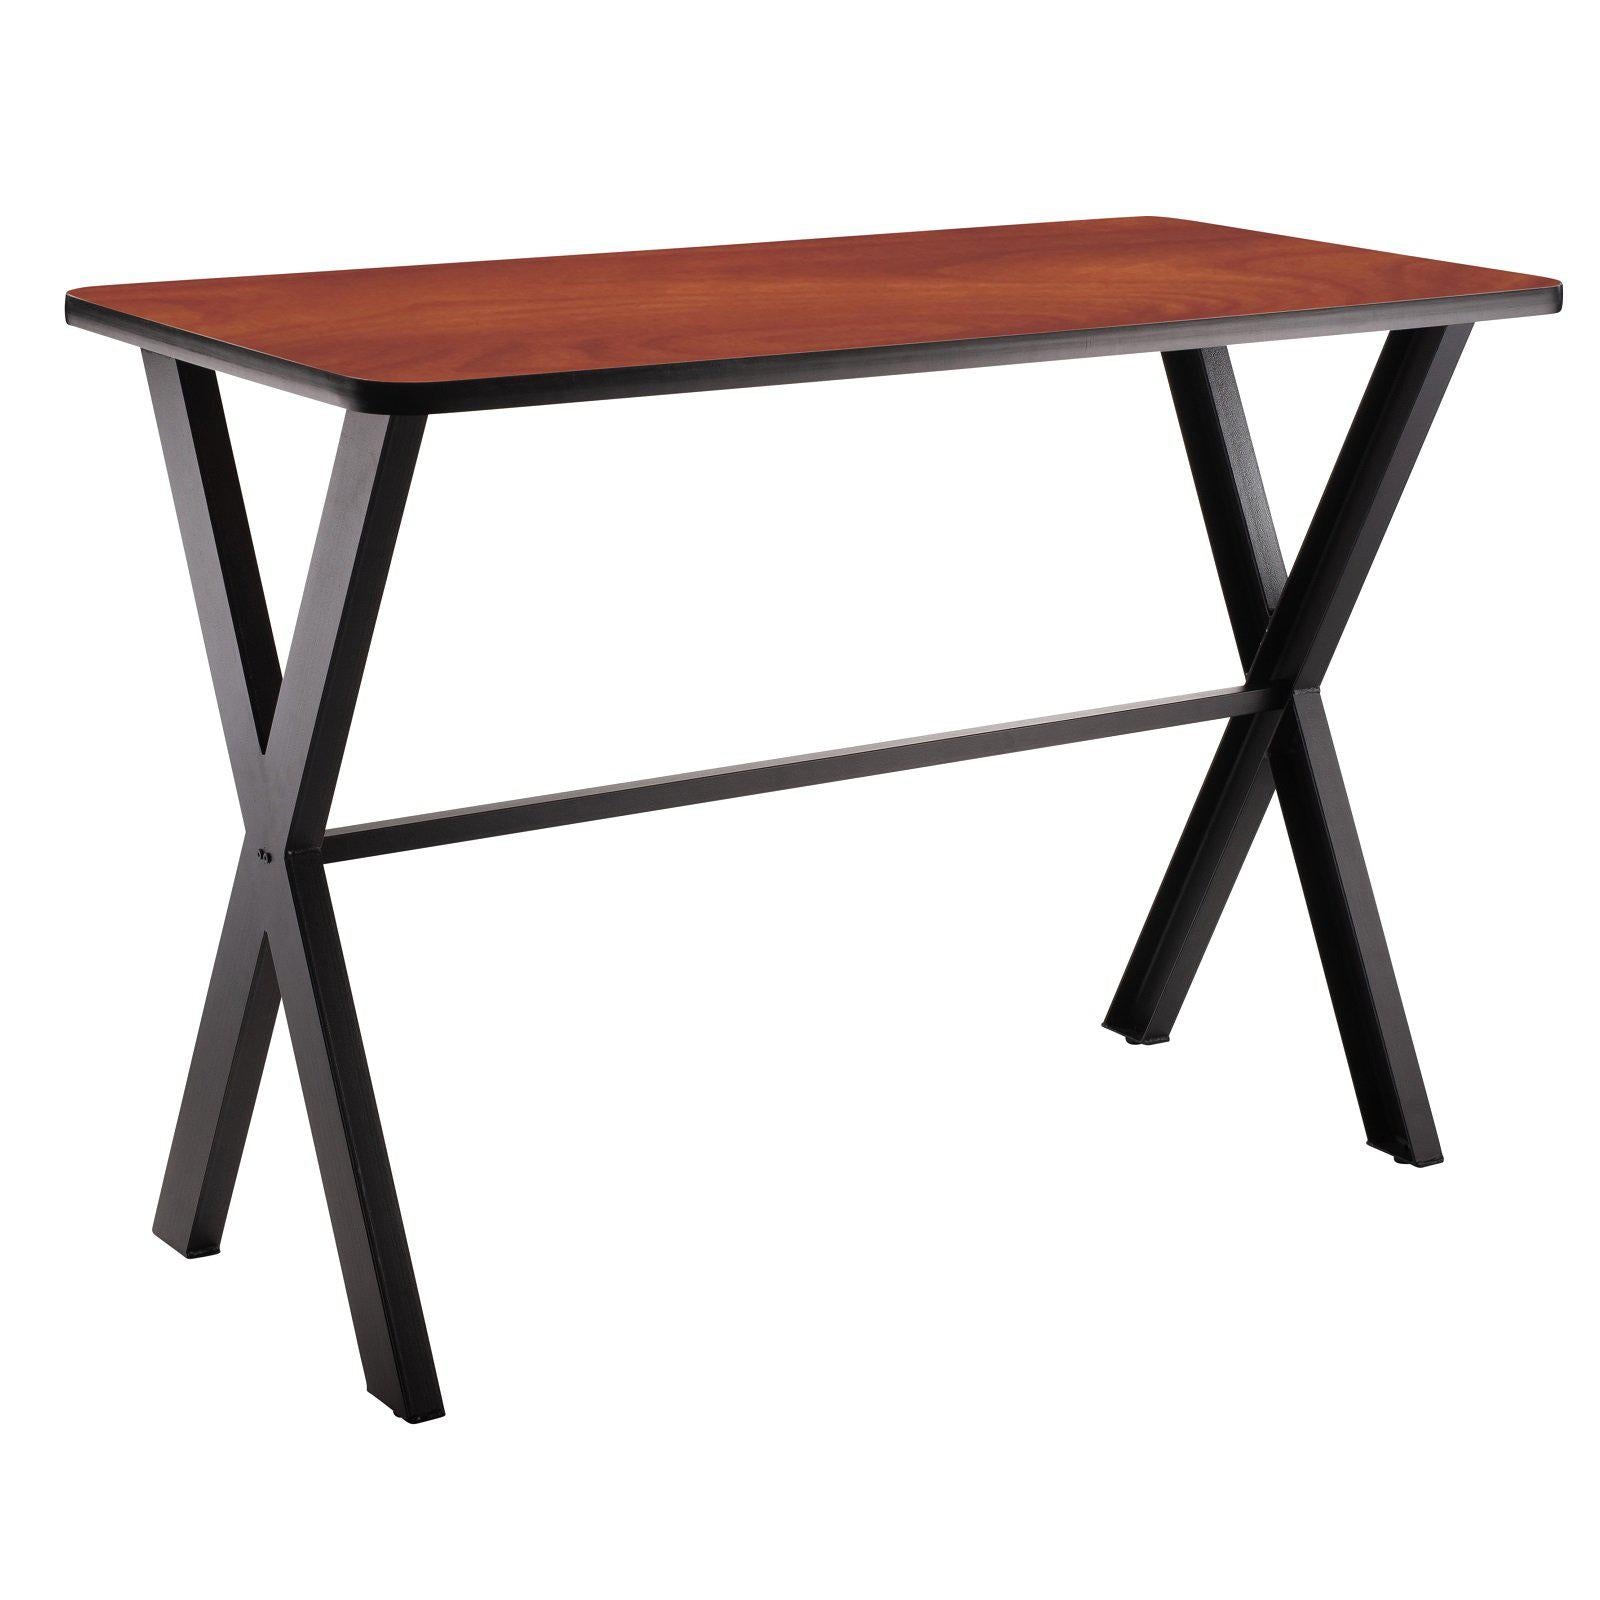 Collaborator Table, 30" x 60", Rectangle,  42" Bar Height w/ Crossbeam, High Pressure Laminate Top, Particleboard Core